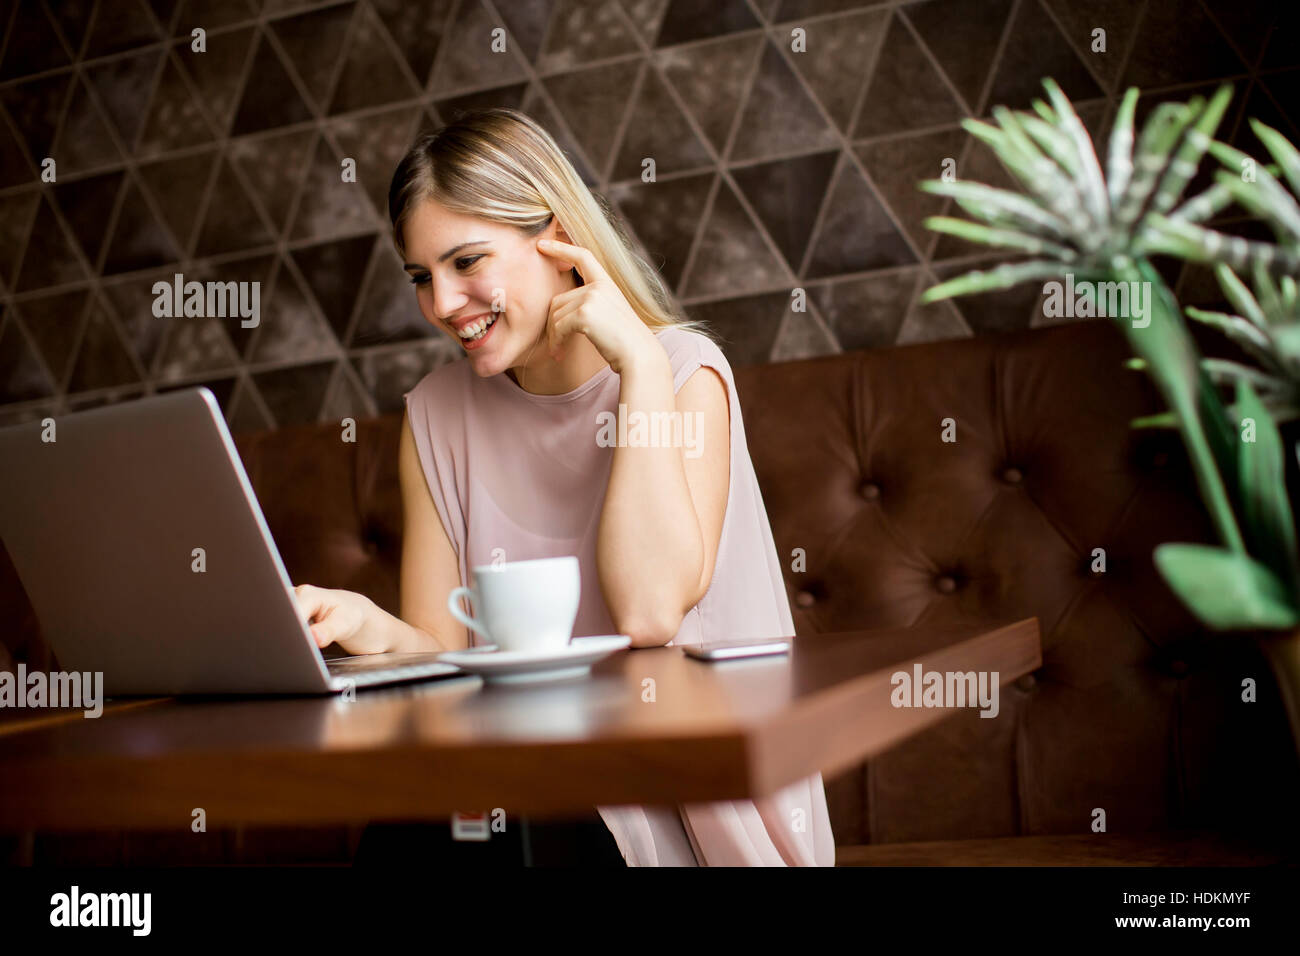 Freelance young woman sitting in the cafeteria with laptop and drinking coffee Stock Photo